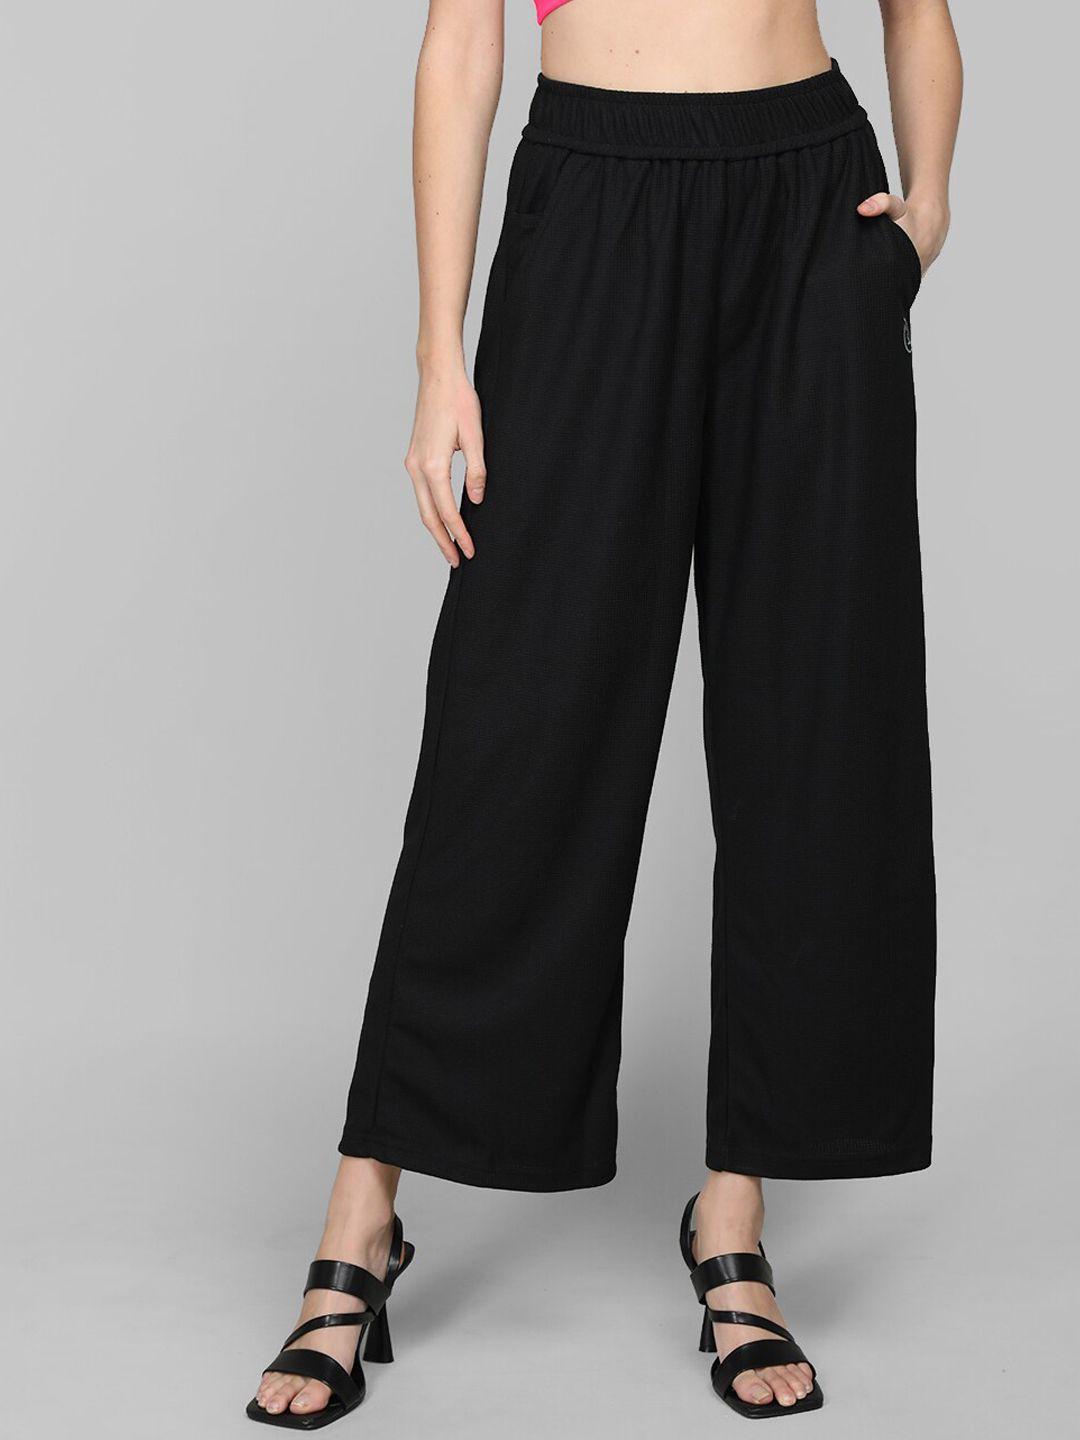 chkokko women mid-rise loose fit trousers